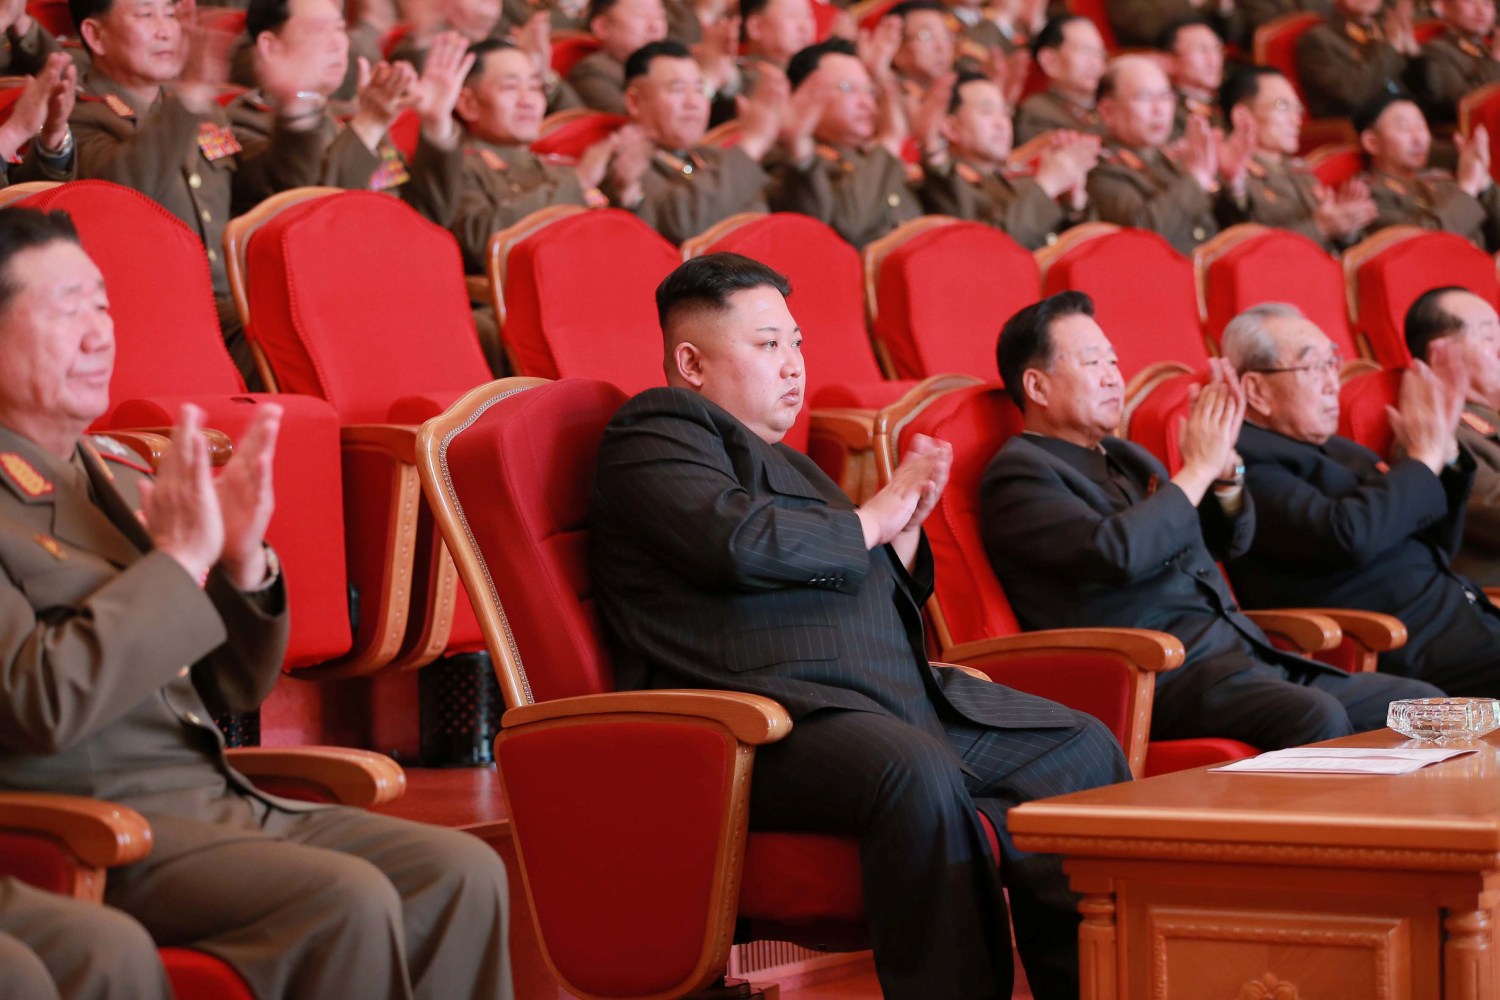 Kim Jong Un watches a performance at the People's Theatre to mark the 70th anniversary of the founding of the State Merited Chorus.